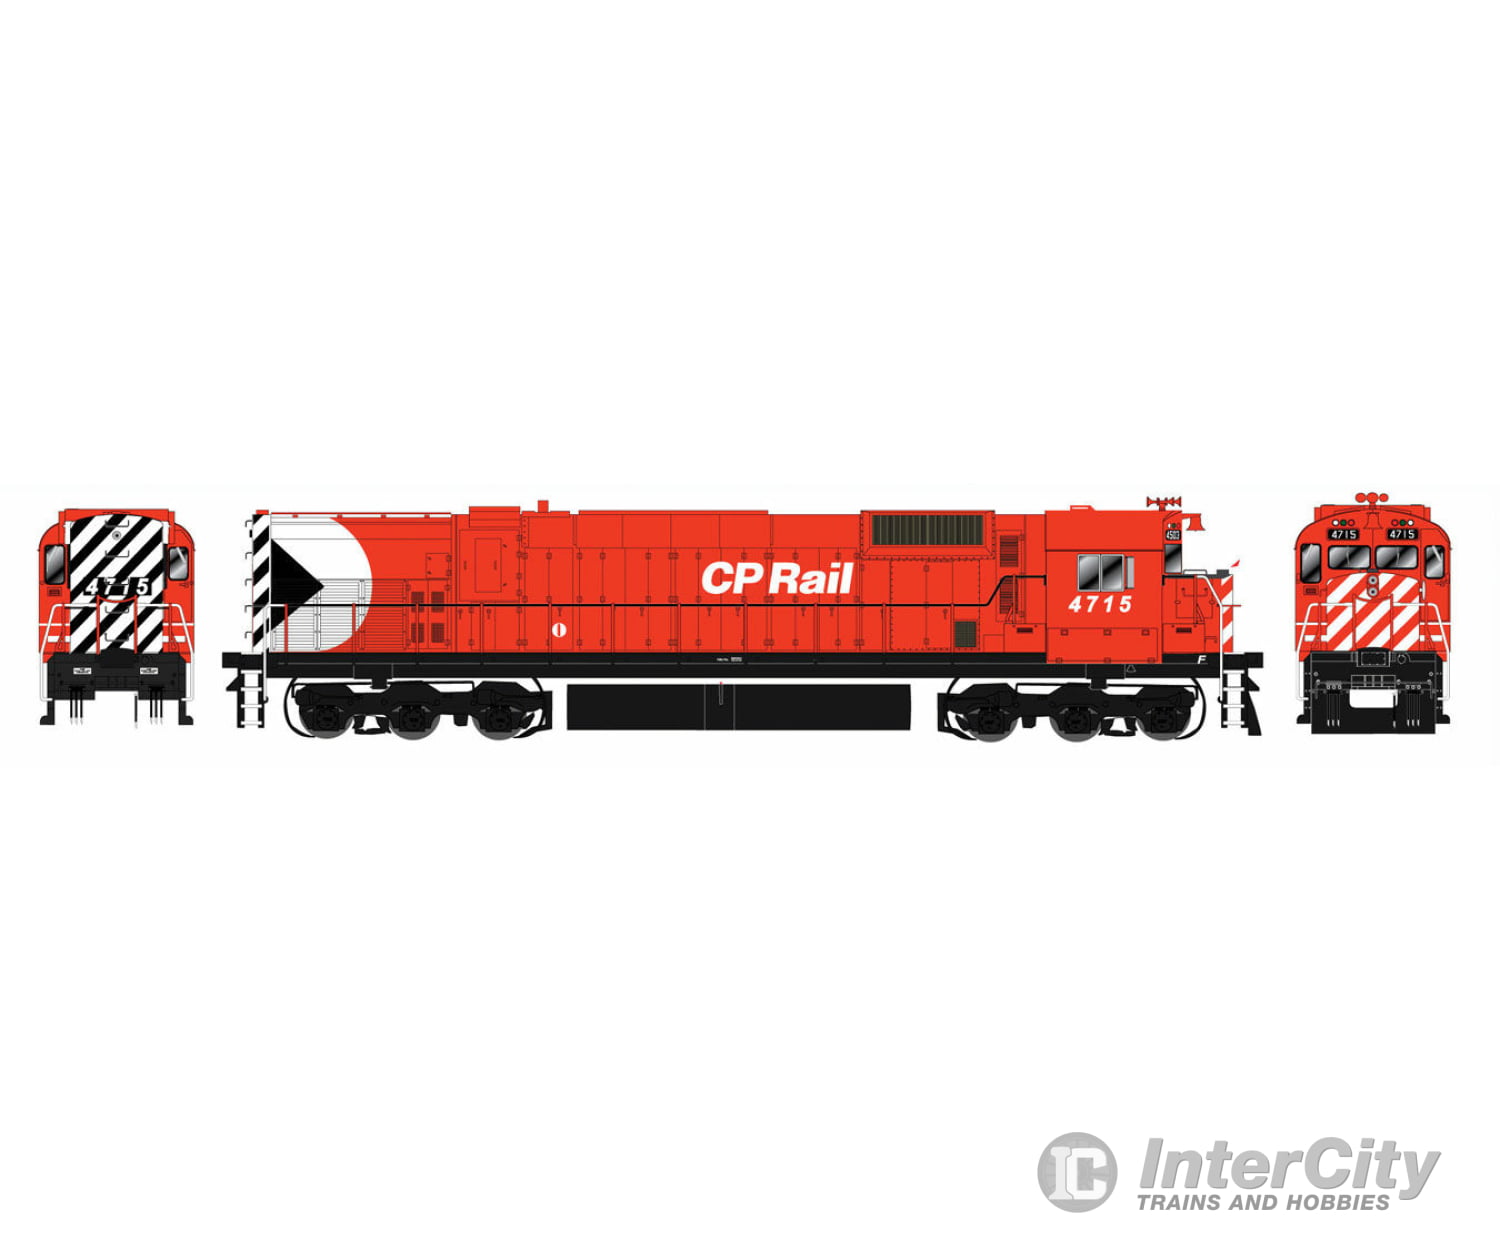 Bowser 24299 Ho Mlw M636 W/Loksound & Dcc - Executive Line -- Canadian Pacific #4727 (Action Red 8